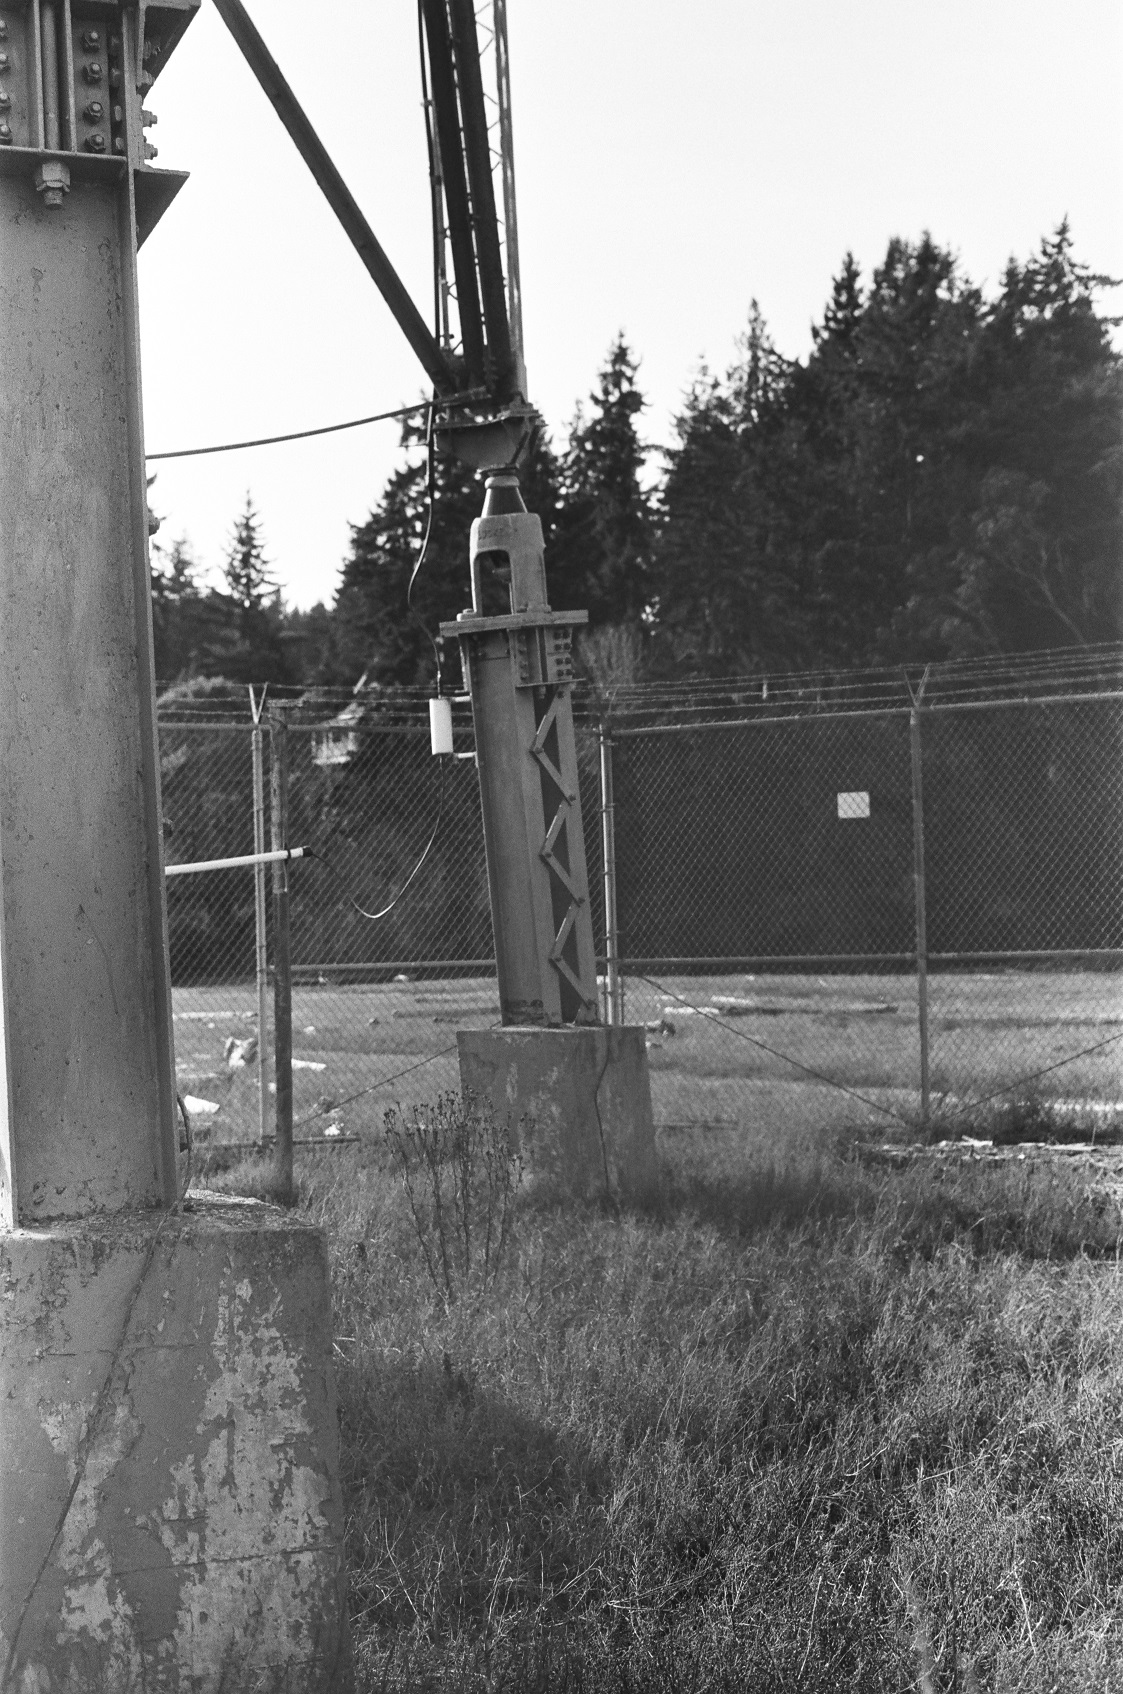 PICTURED: A black and white photo of the legs of a fenced in radio communication tower. It is enclosed by chainlink fence. Trees are in the background.